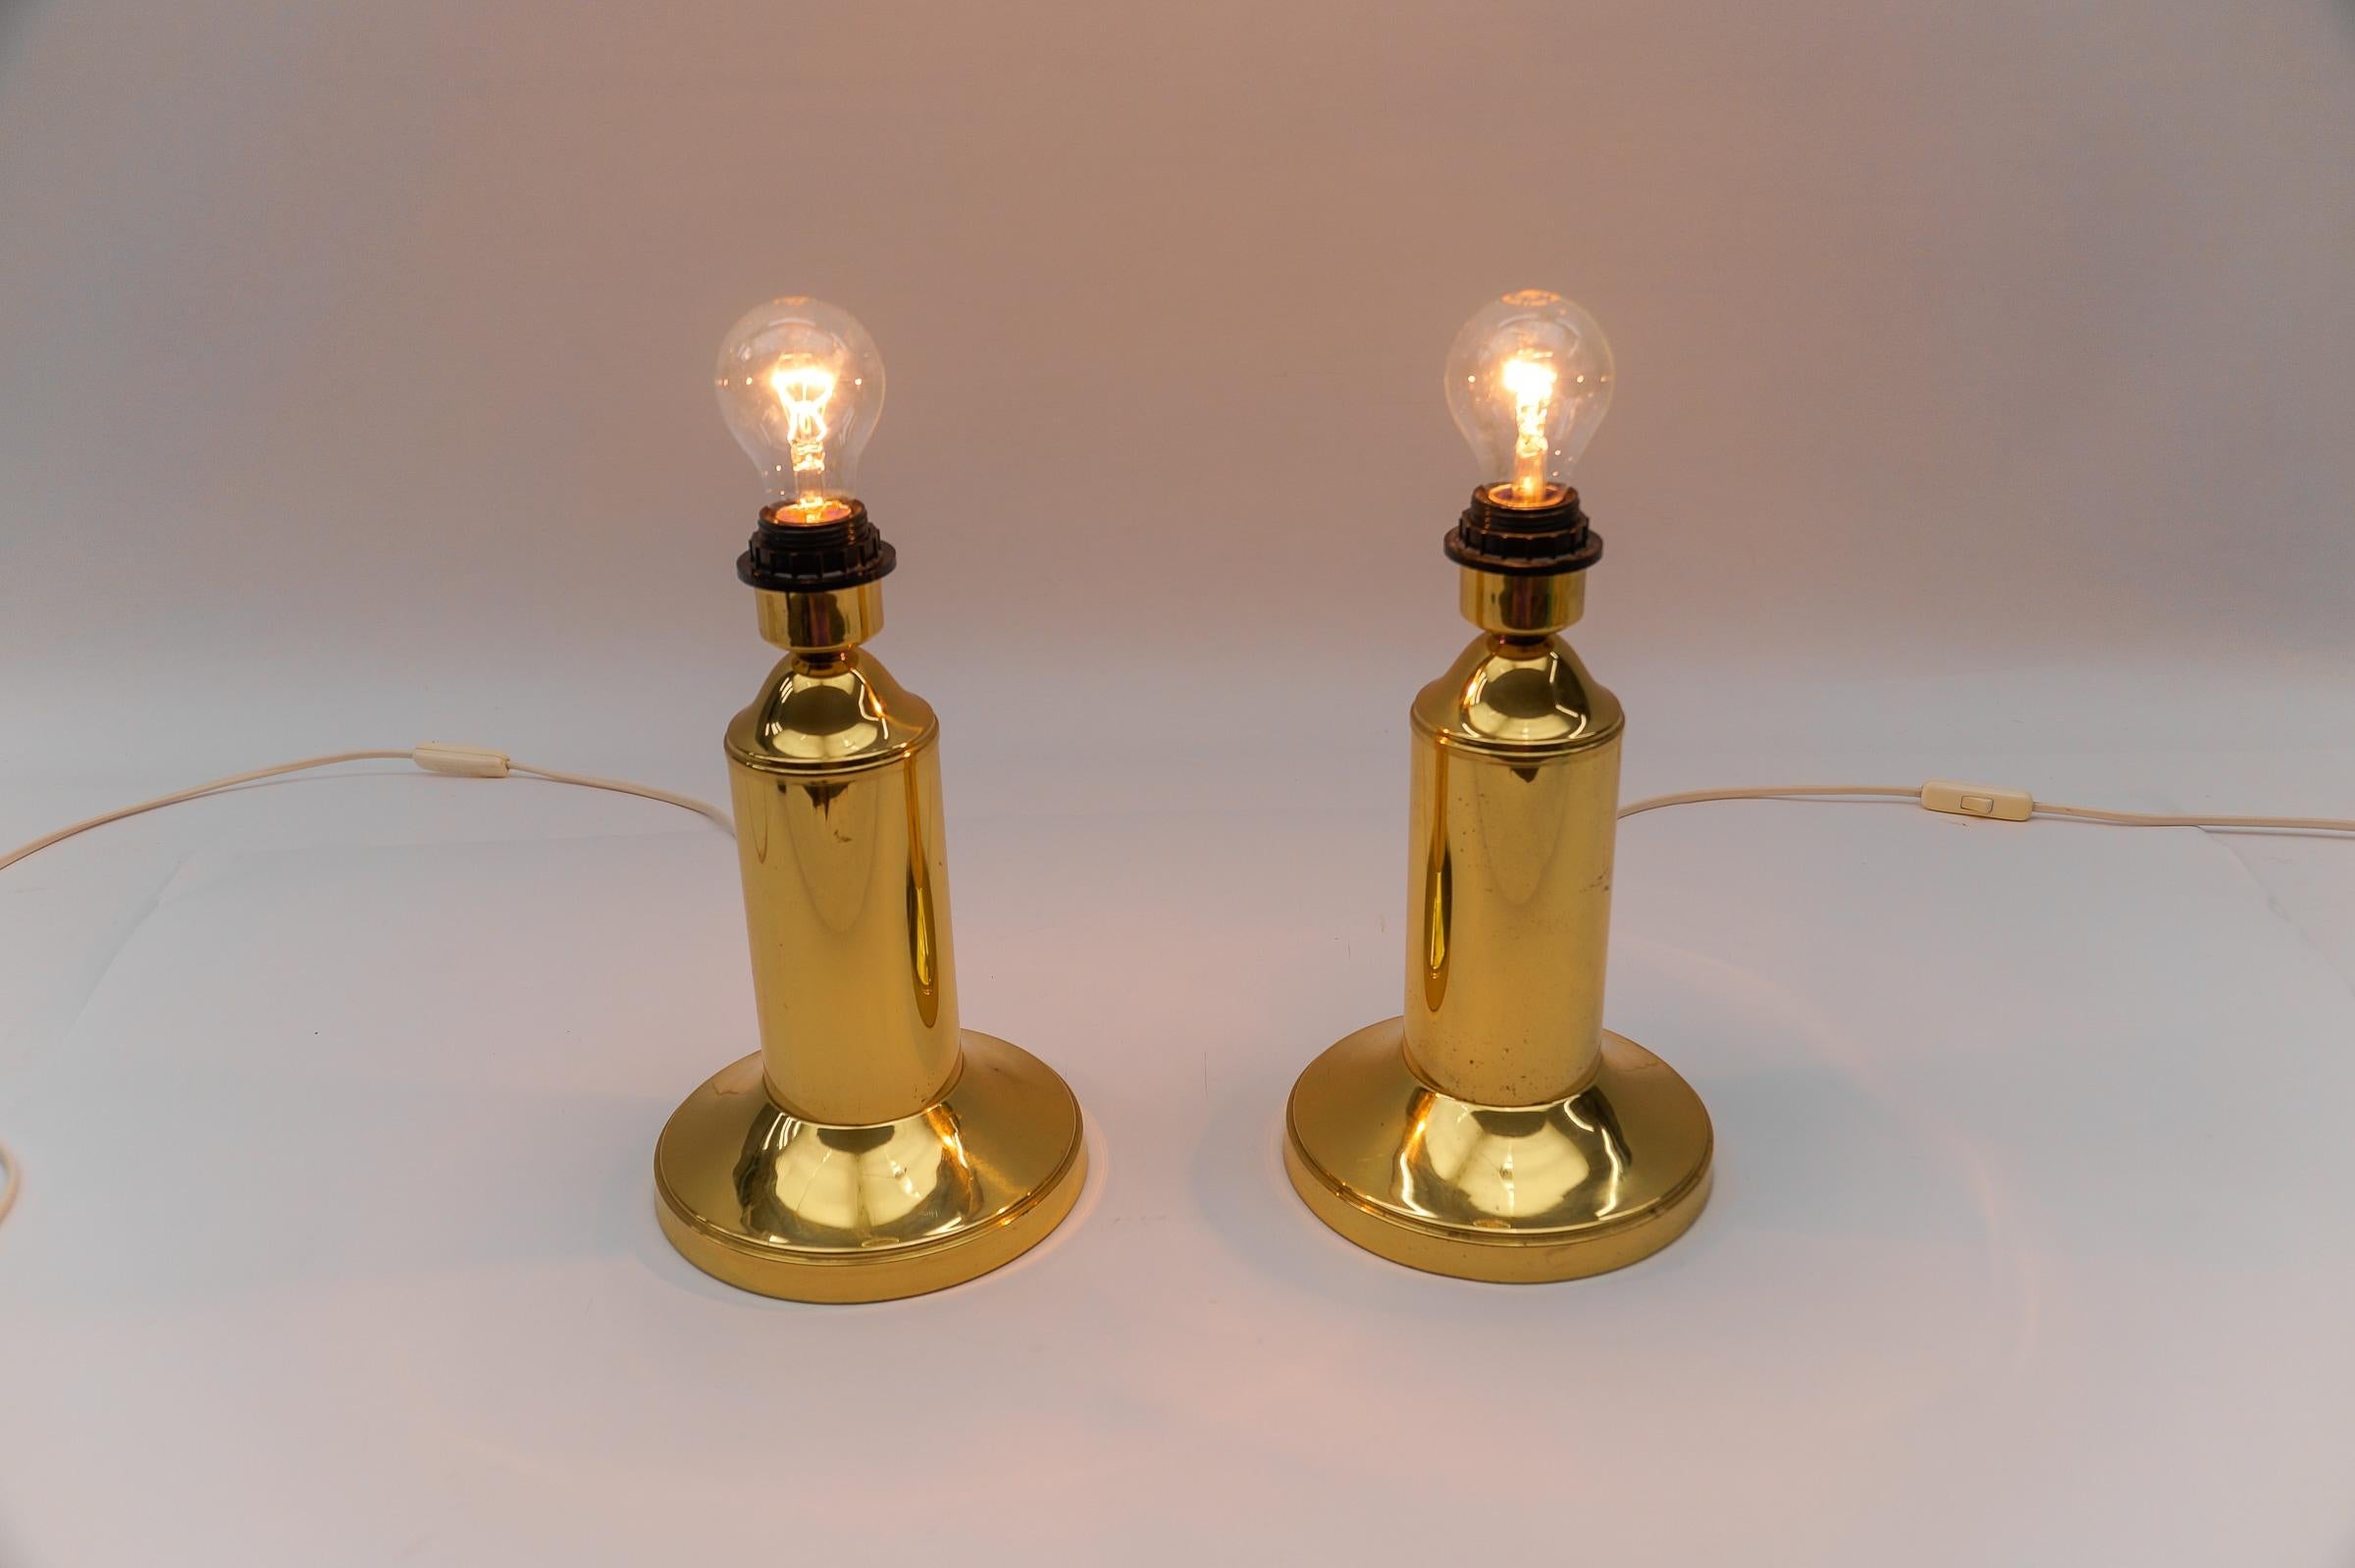 Pair of Mid Century Modern Brass Table Lamp Bases, 1960s For Sale 1